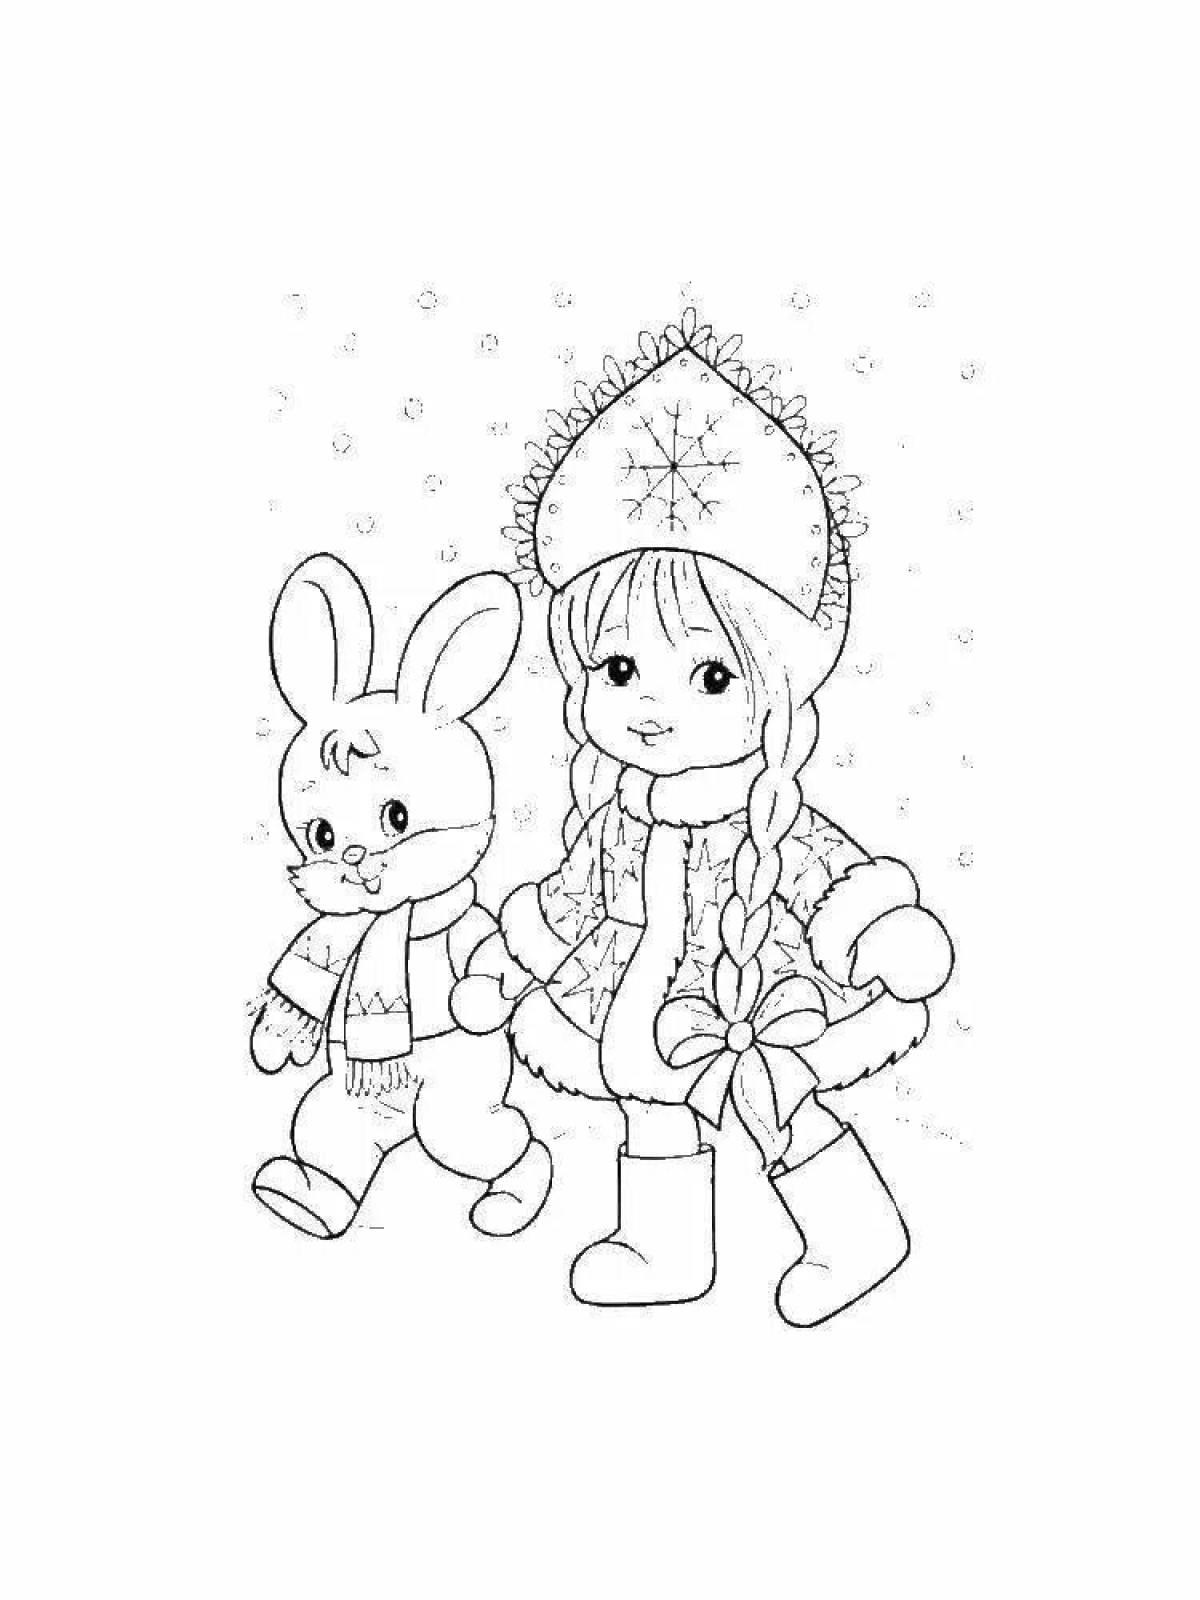 Colour coloring bunny new year